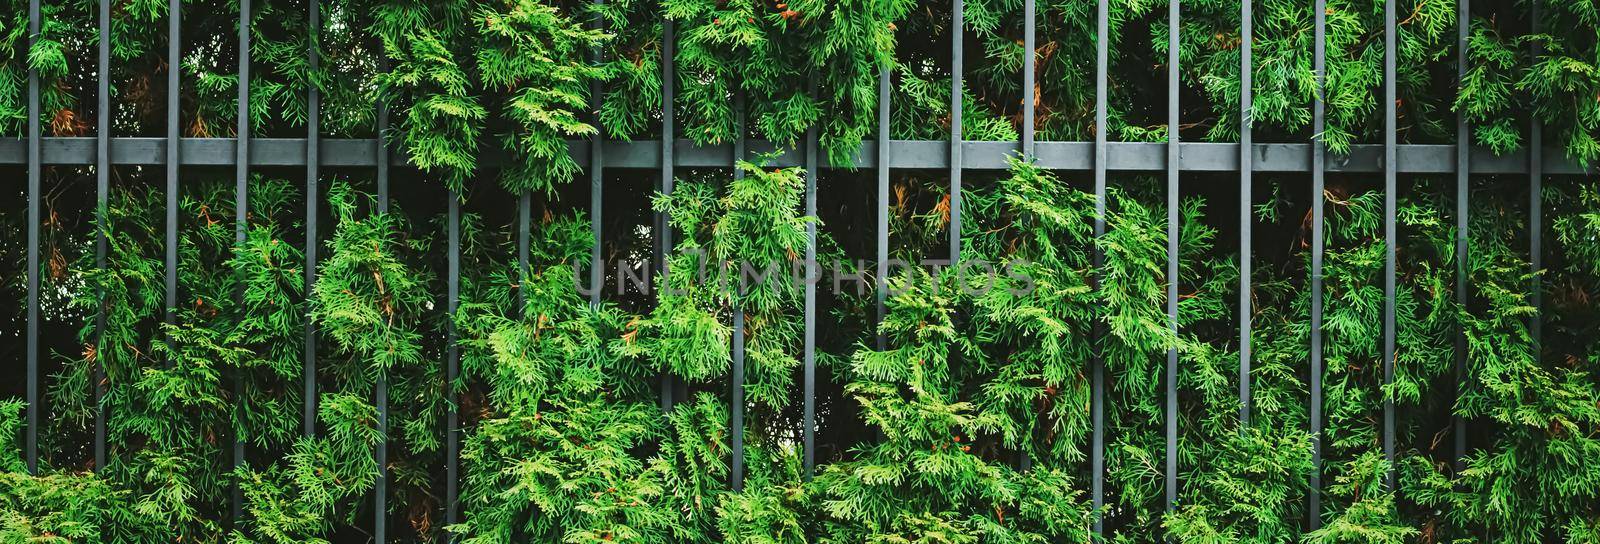 Green plant wall and fence as plant texture, nature background and botanical design.